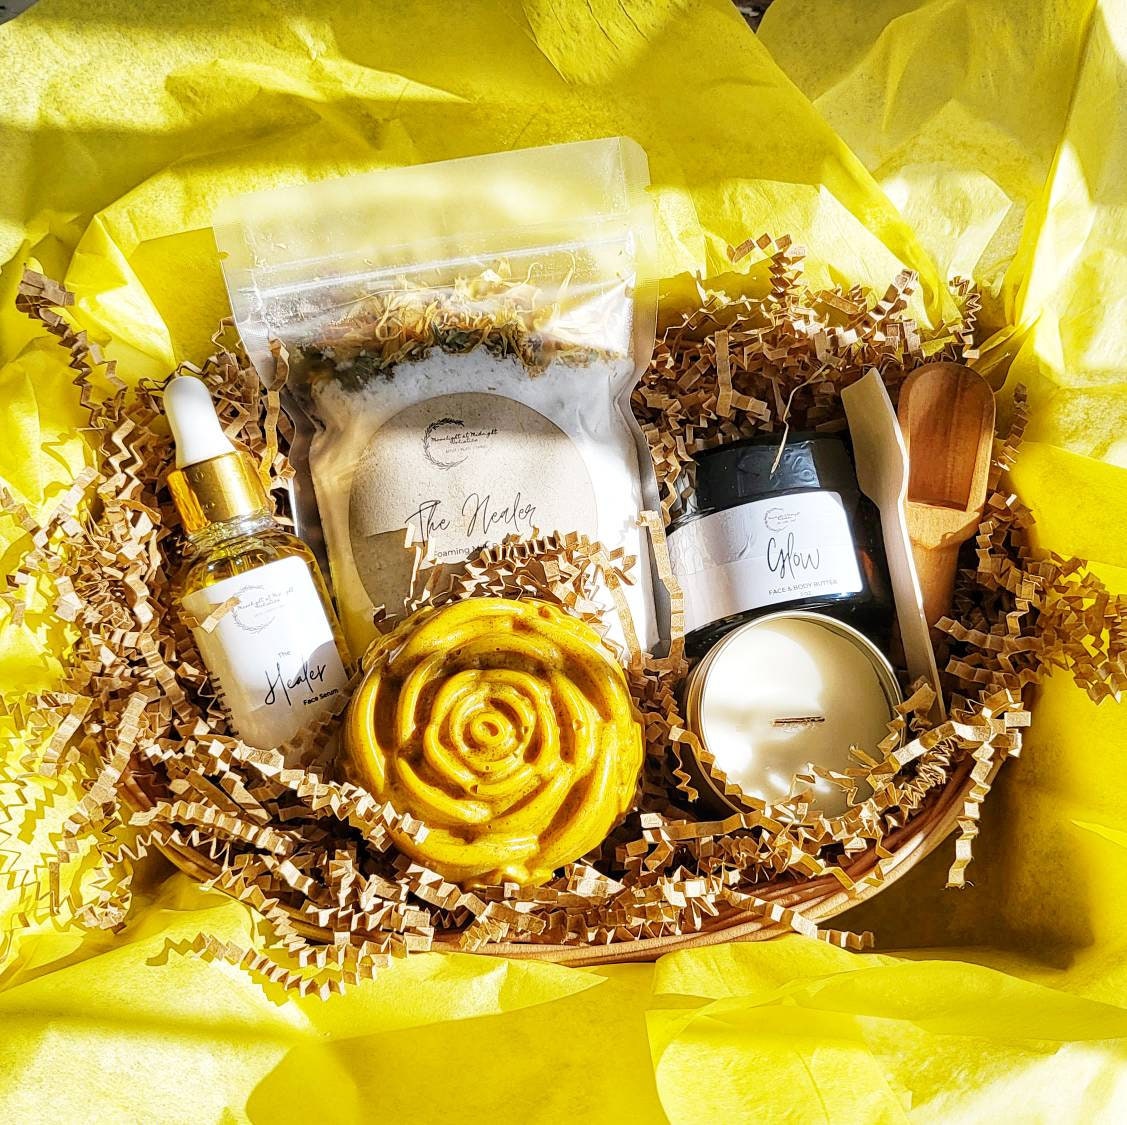 Care Package Gift Box, Spa Box, Natural Skin Care, Mothers Gift Box, Spa  Gift Set, Self Care Box, Birthday Gift Box, Gift Box for Women 